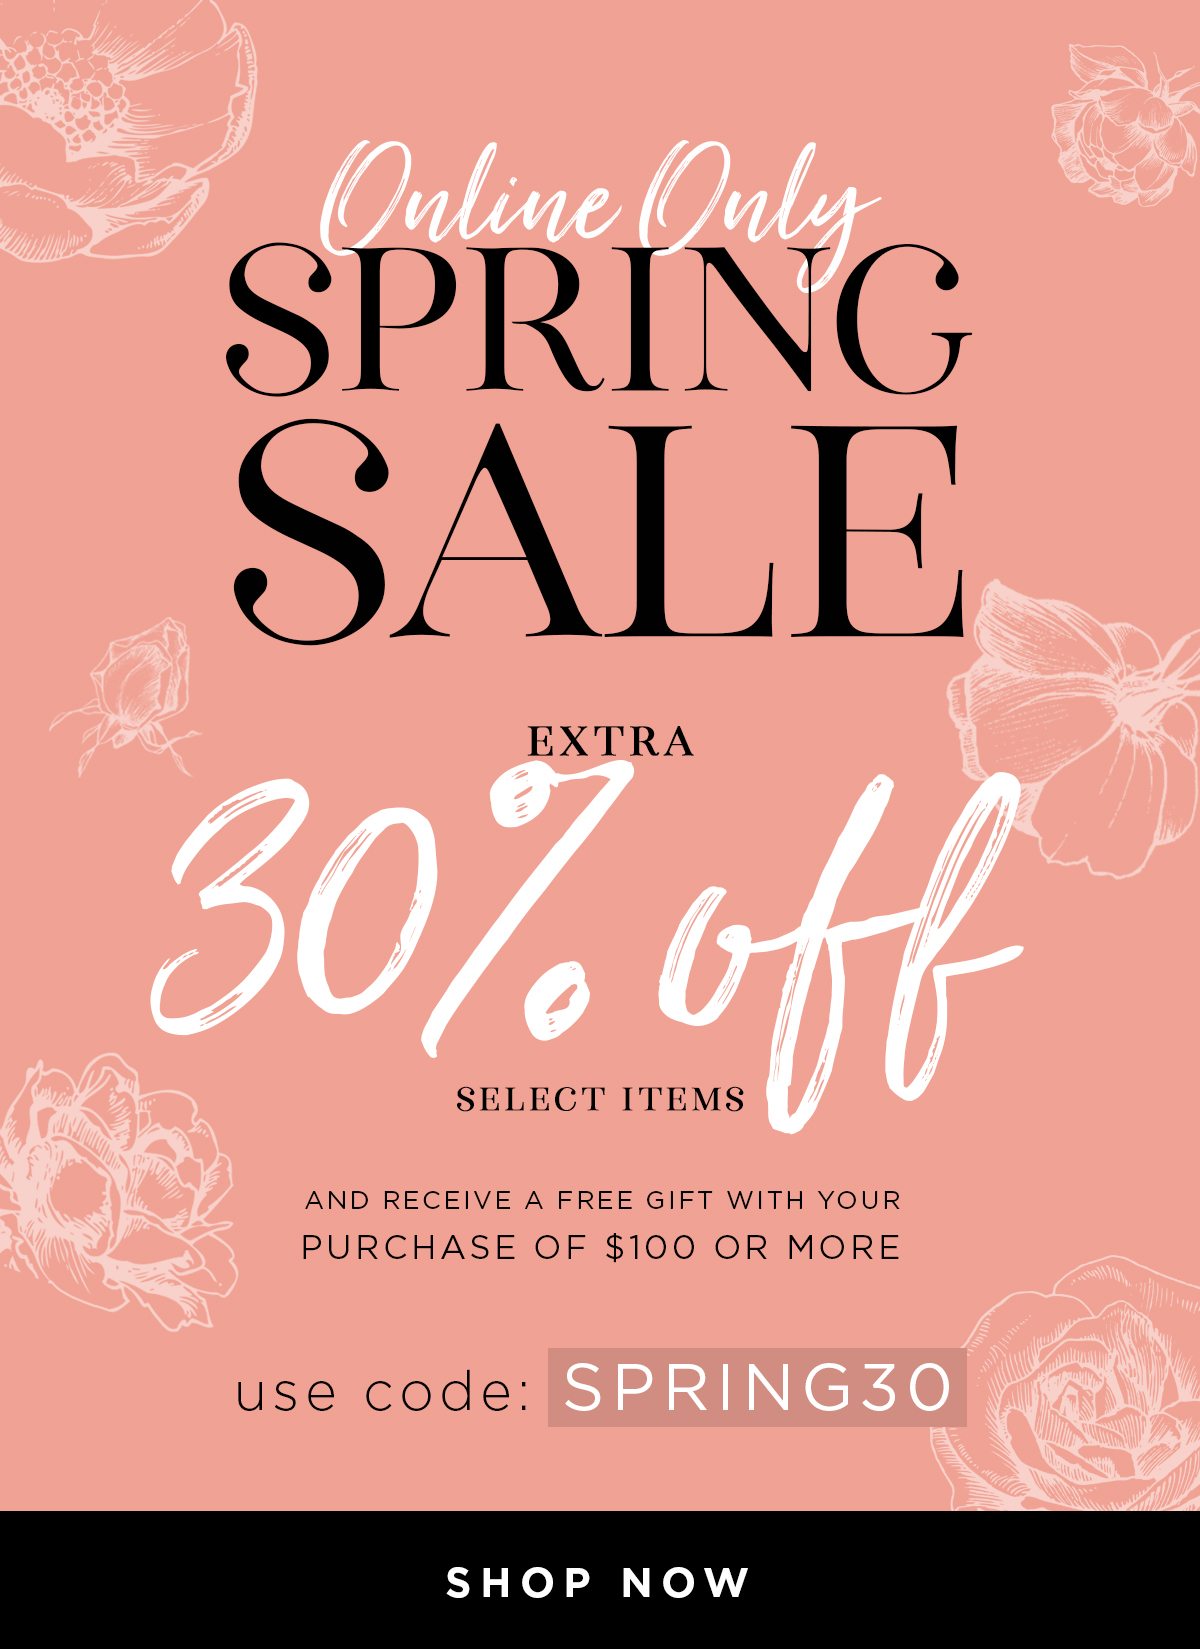 Spring Sale Online Only With An Extra 30% Off Select Items And Receive A Free Gift With Your Purchase Of $100 Or More By Using Code: Spring30 - Shop Now!